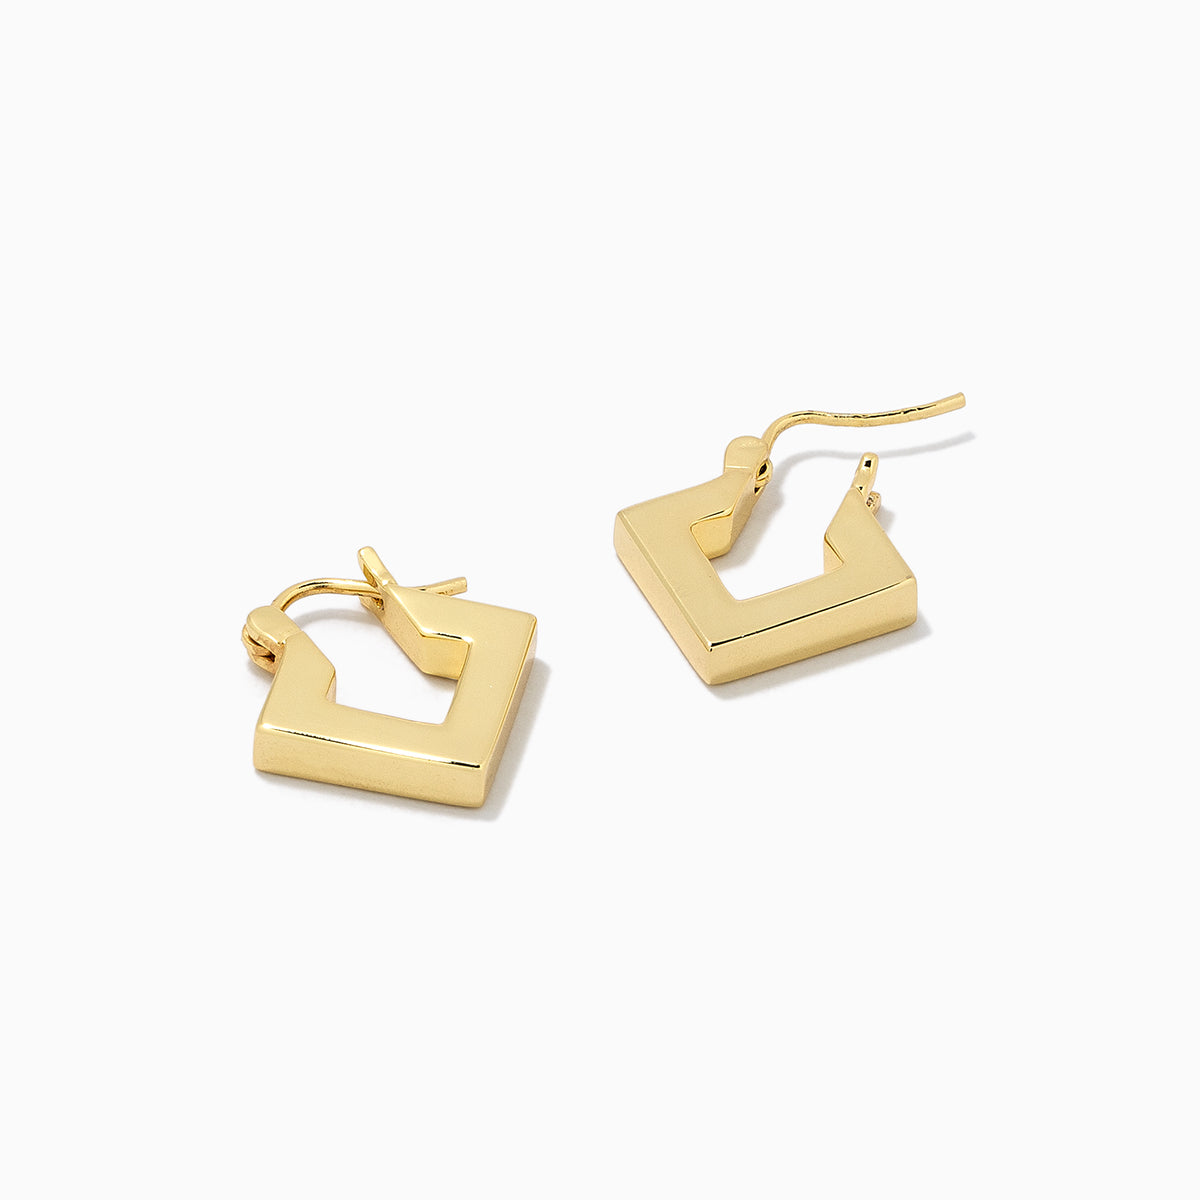 Breaking Point Earrings | Gold | Product Detail Image | Uncommon James